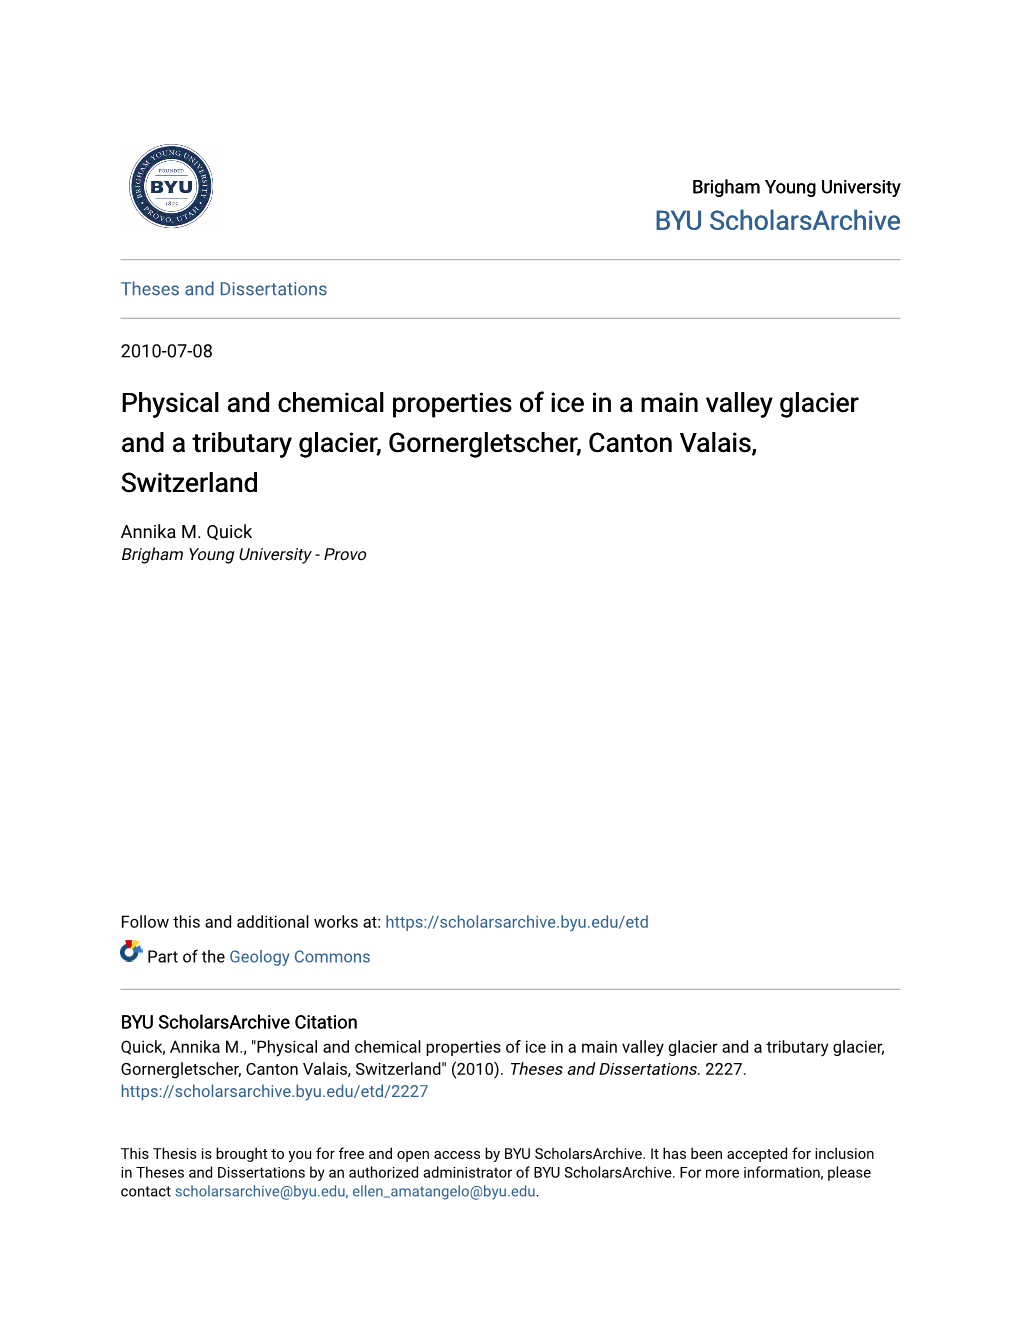 Physical and Chemical Properties of Ice in a Main Valley Glacier and a Tributary Glacier, Gornergletscher, Canton Valais, Switzerland